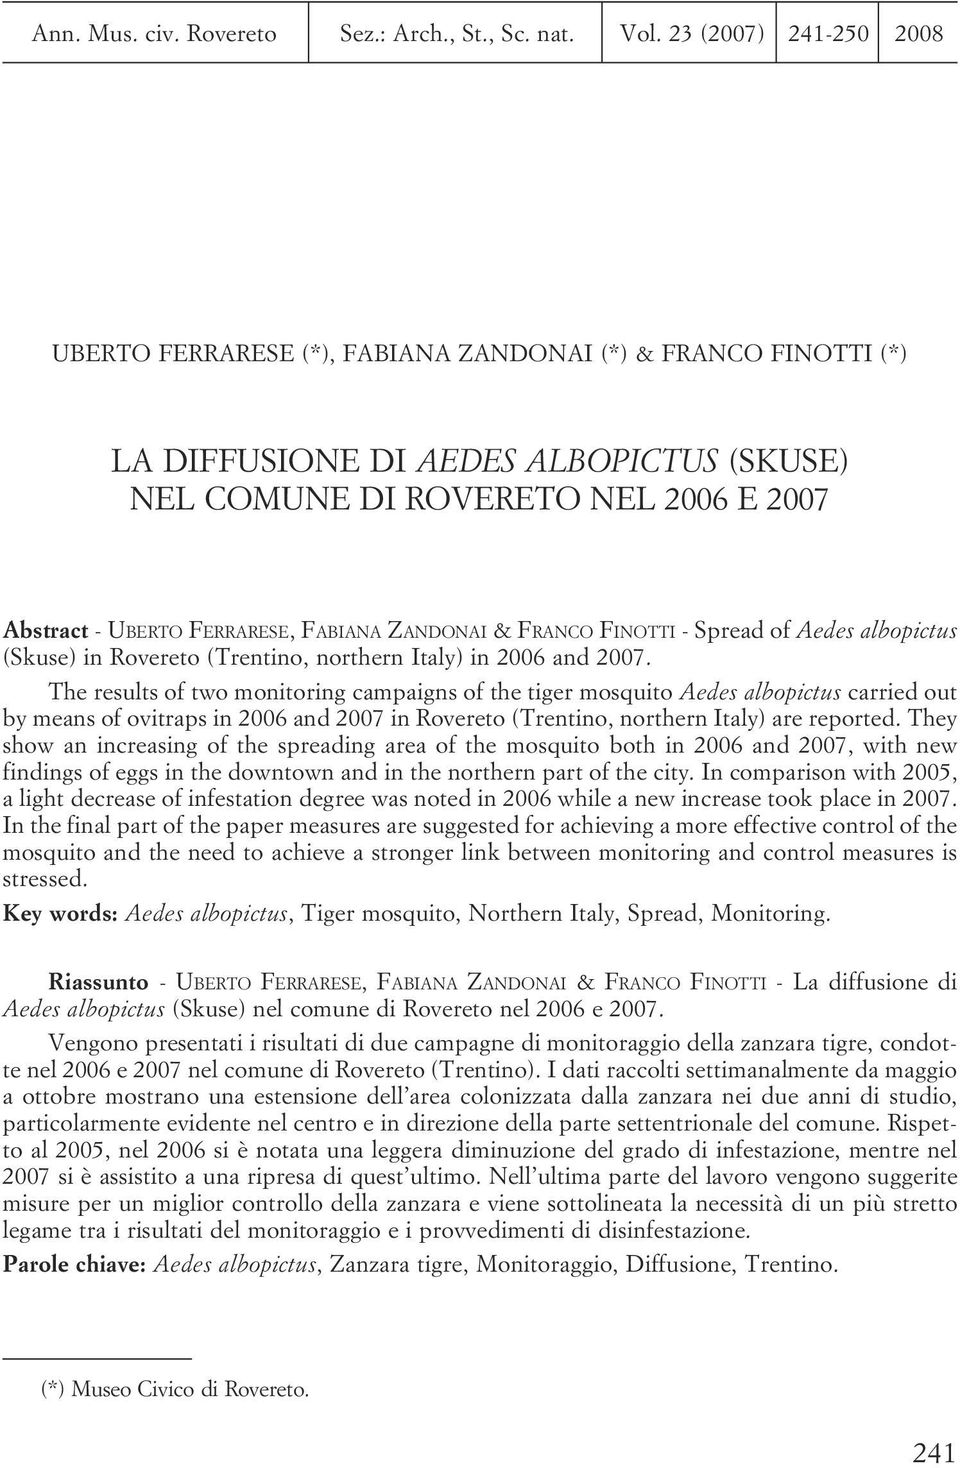 monitoring campaigns of the tiger mosquito Aedes albopictus carried out by means of ovitraps in 2006 and 2007 in Rovereto (Trentino, northern Italy) are reported They show an increasing of the